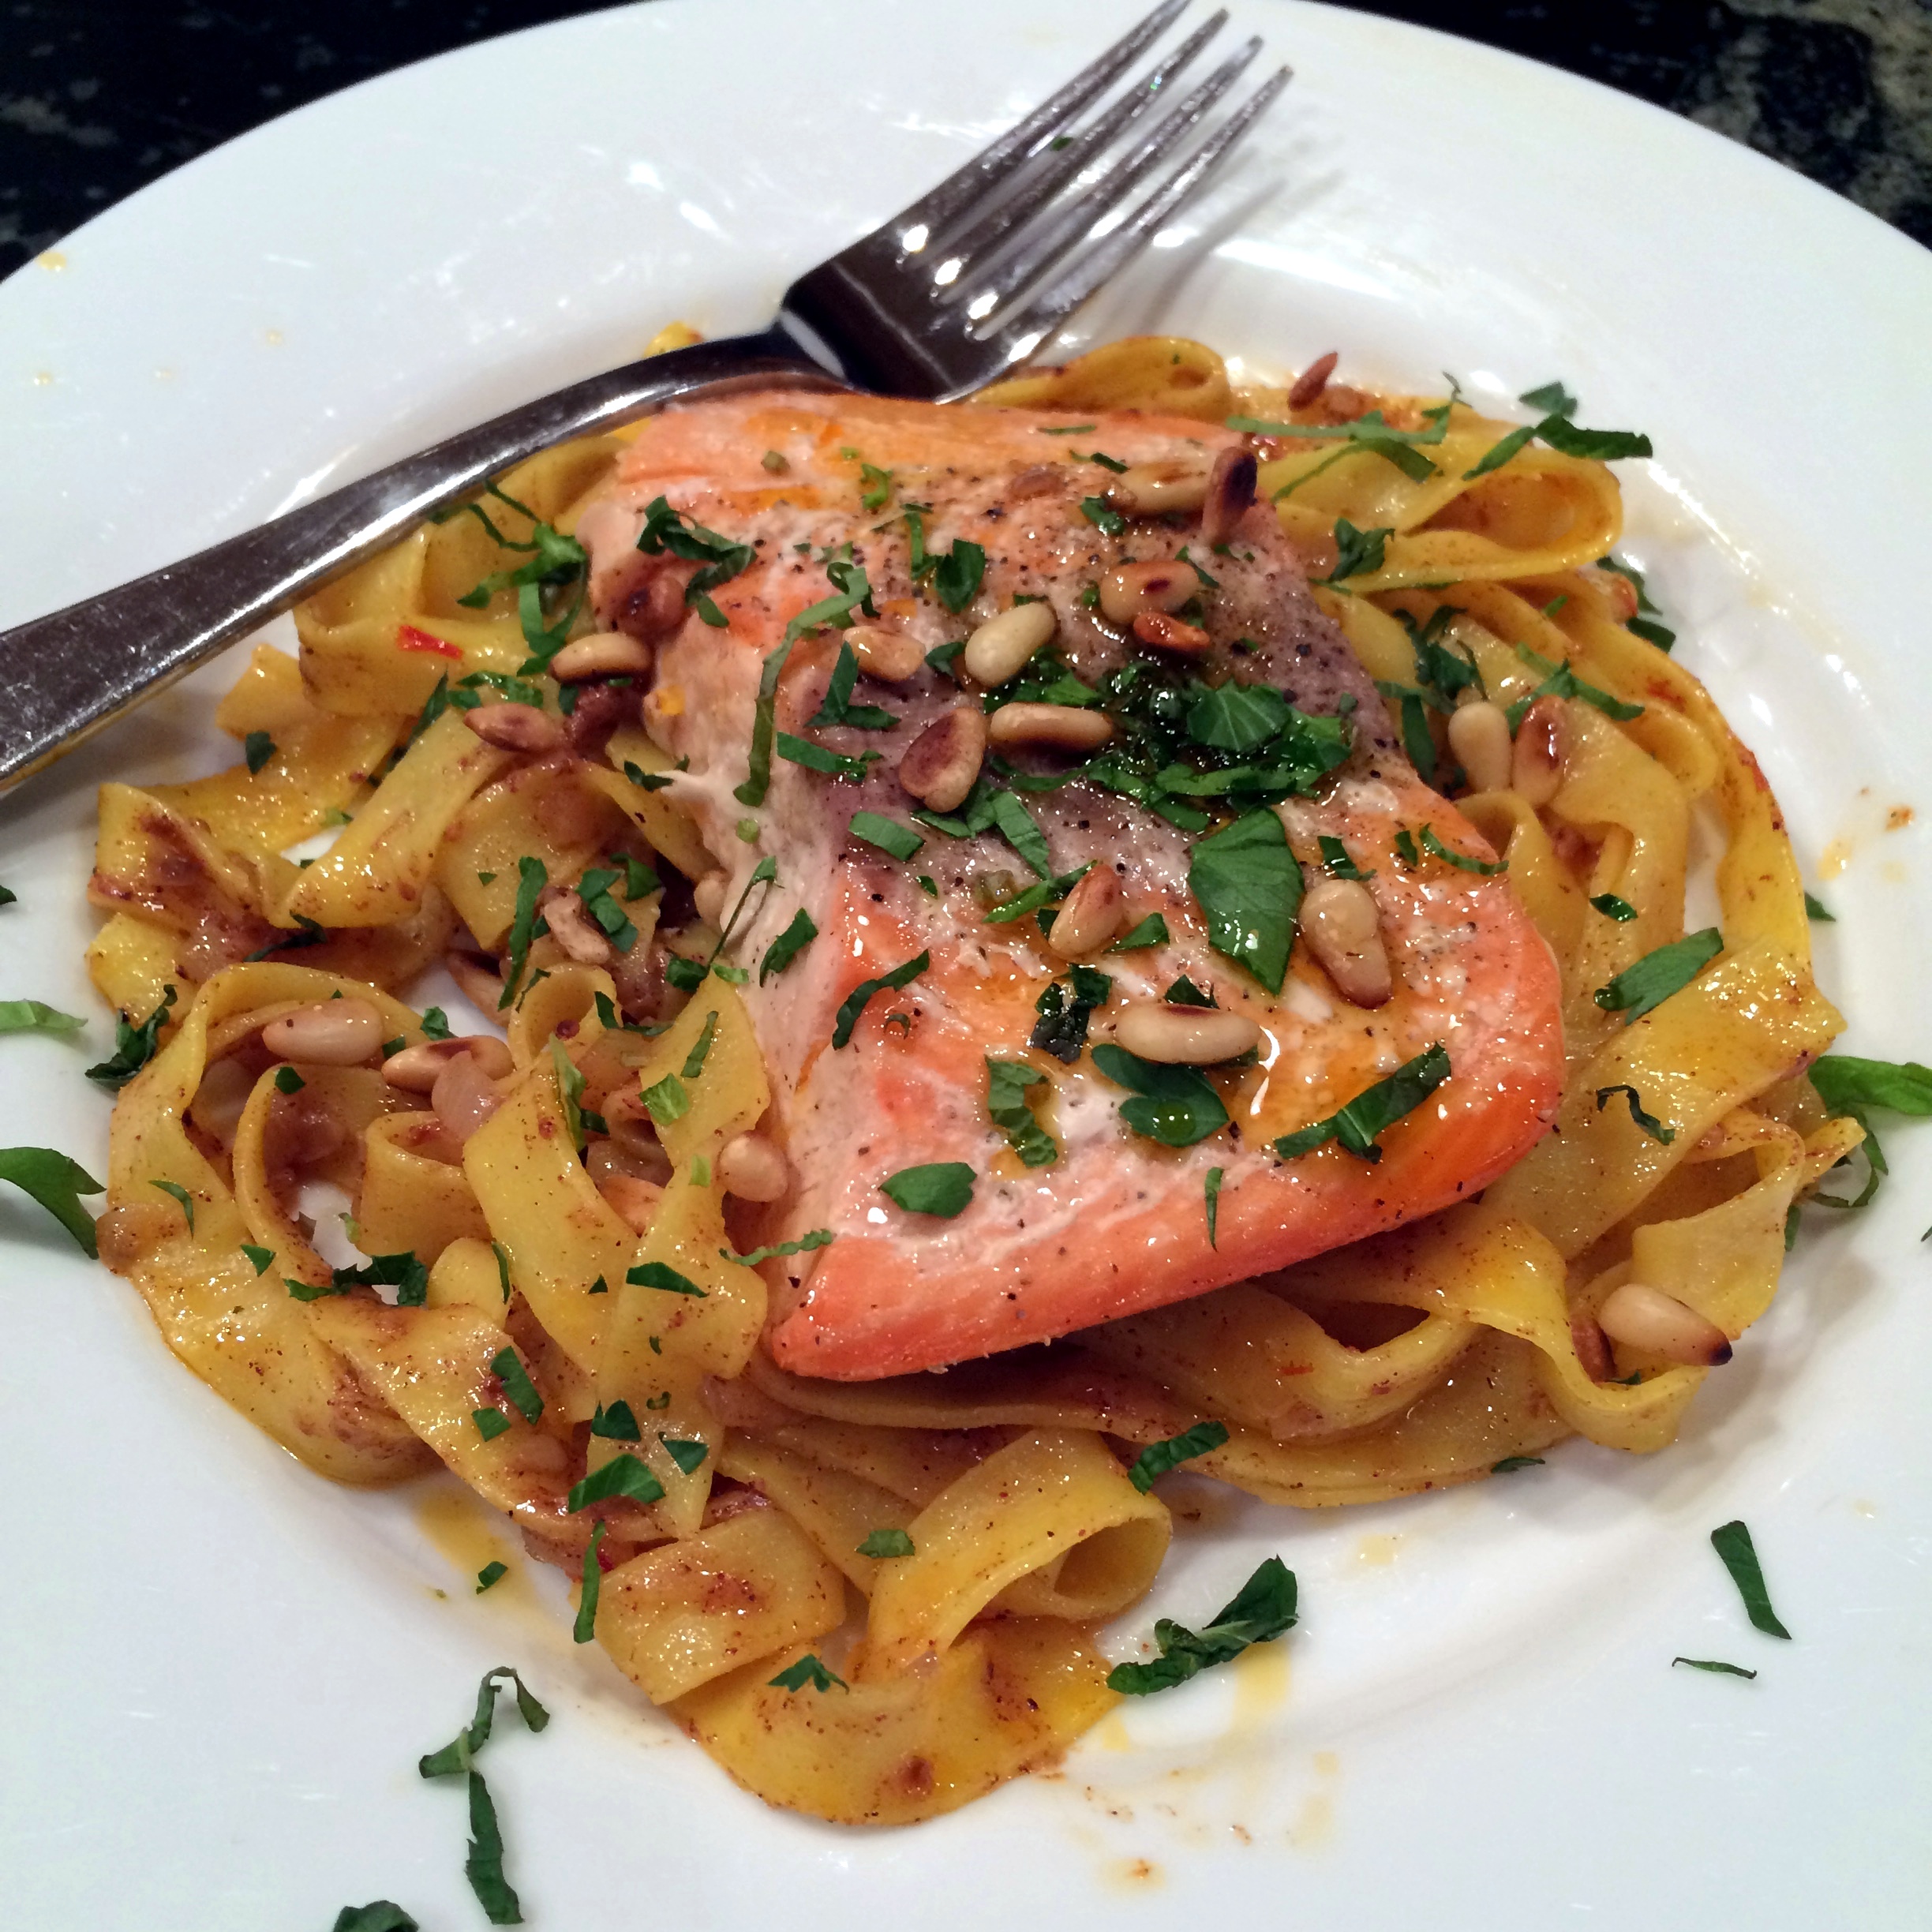 Fettuccine with Spice Butter and Salmon